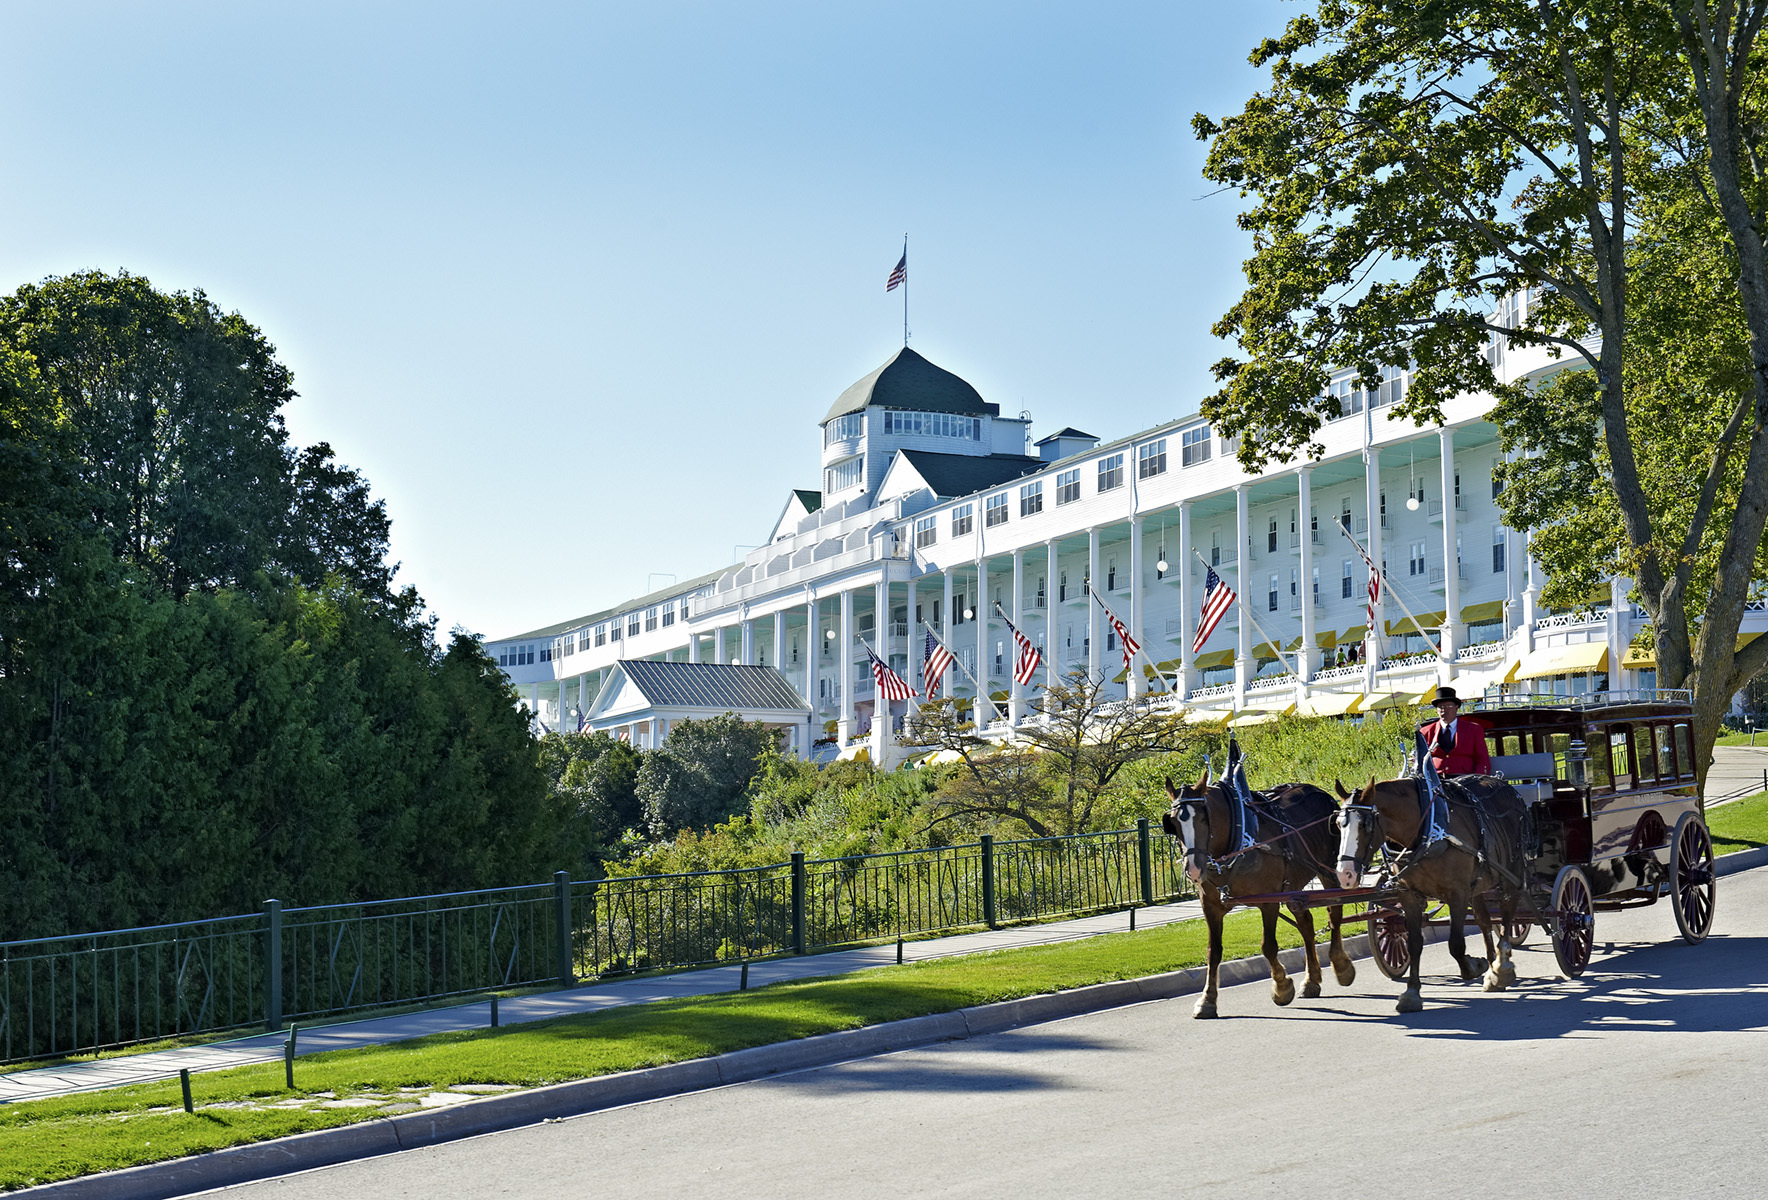 Grand Hotel
Mackinac Island  : Commercial Projects : MICHEL ARNAUD PHOTOGRAPHY